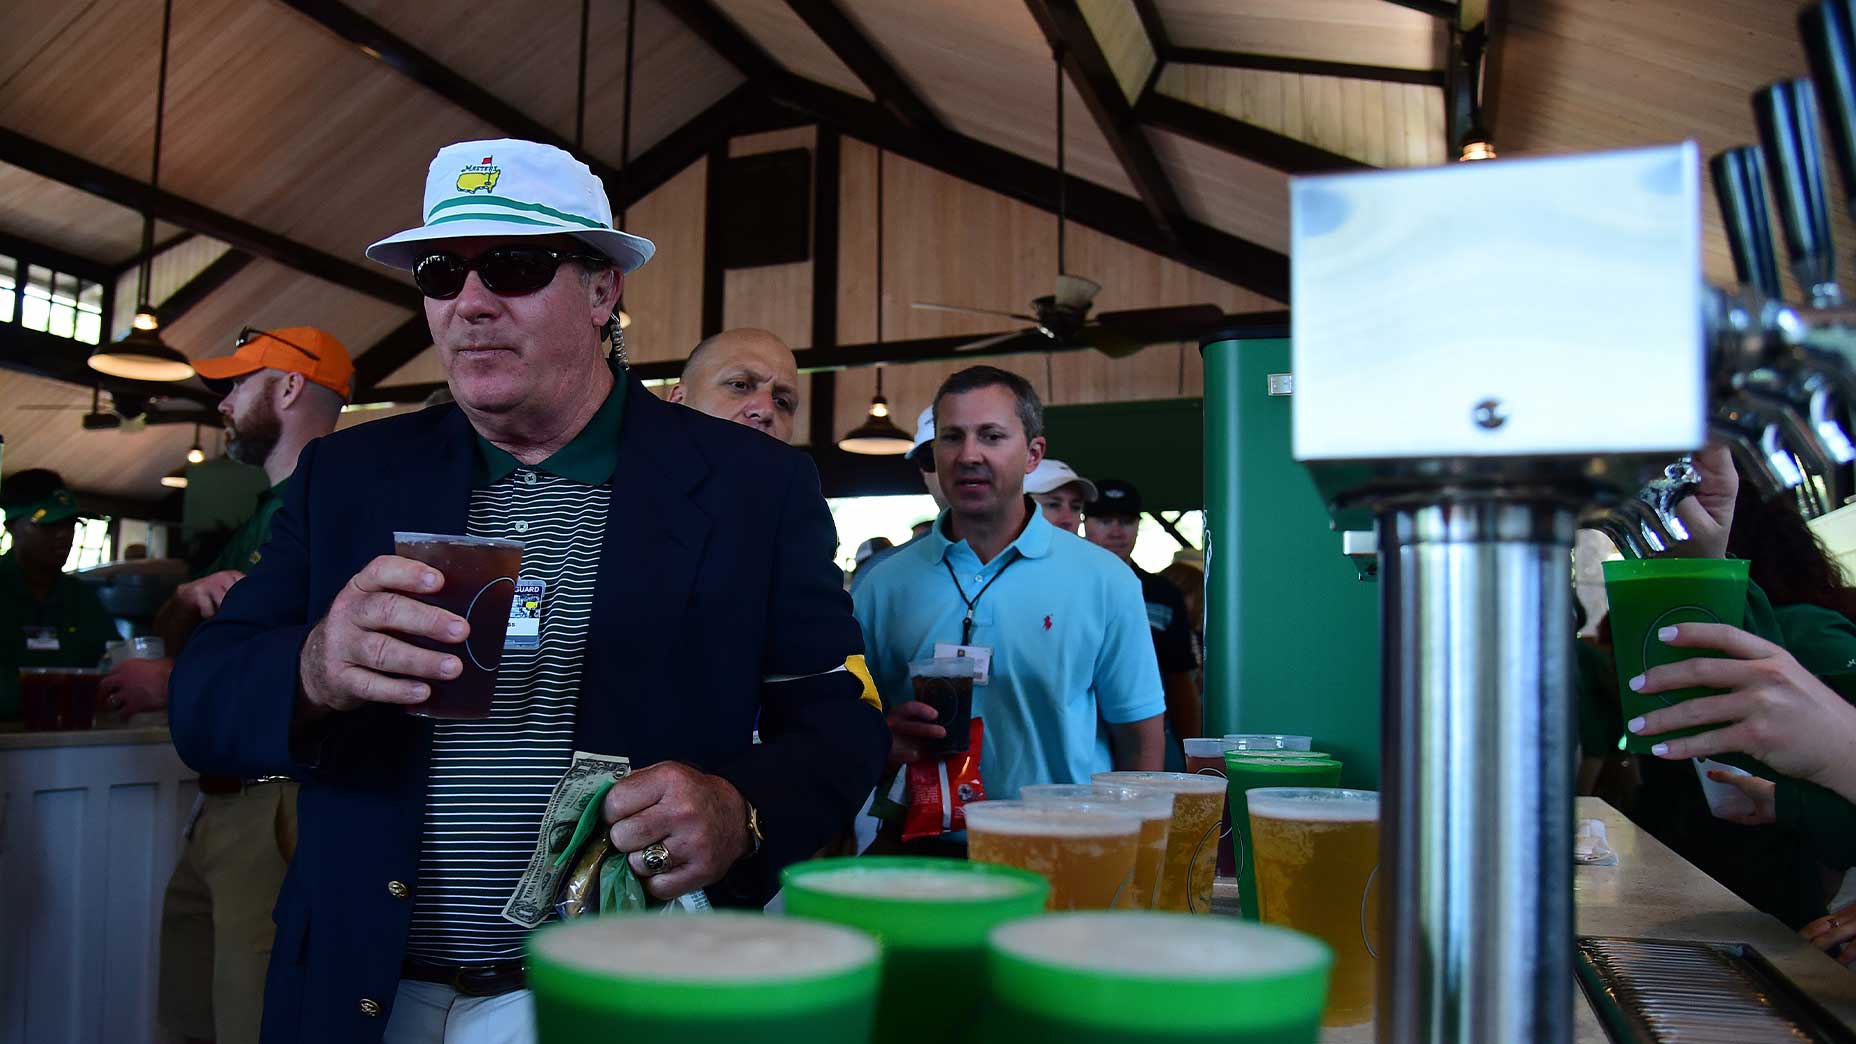 fan purchases beer at the Masters in concession area with hat